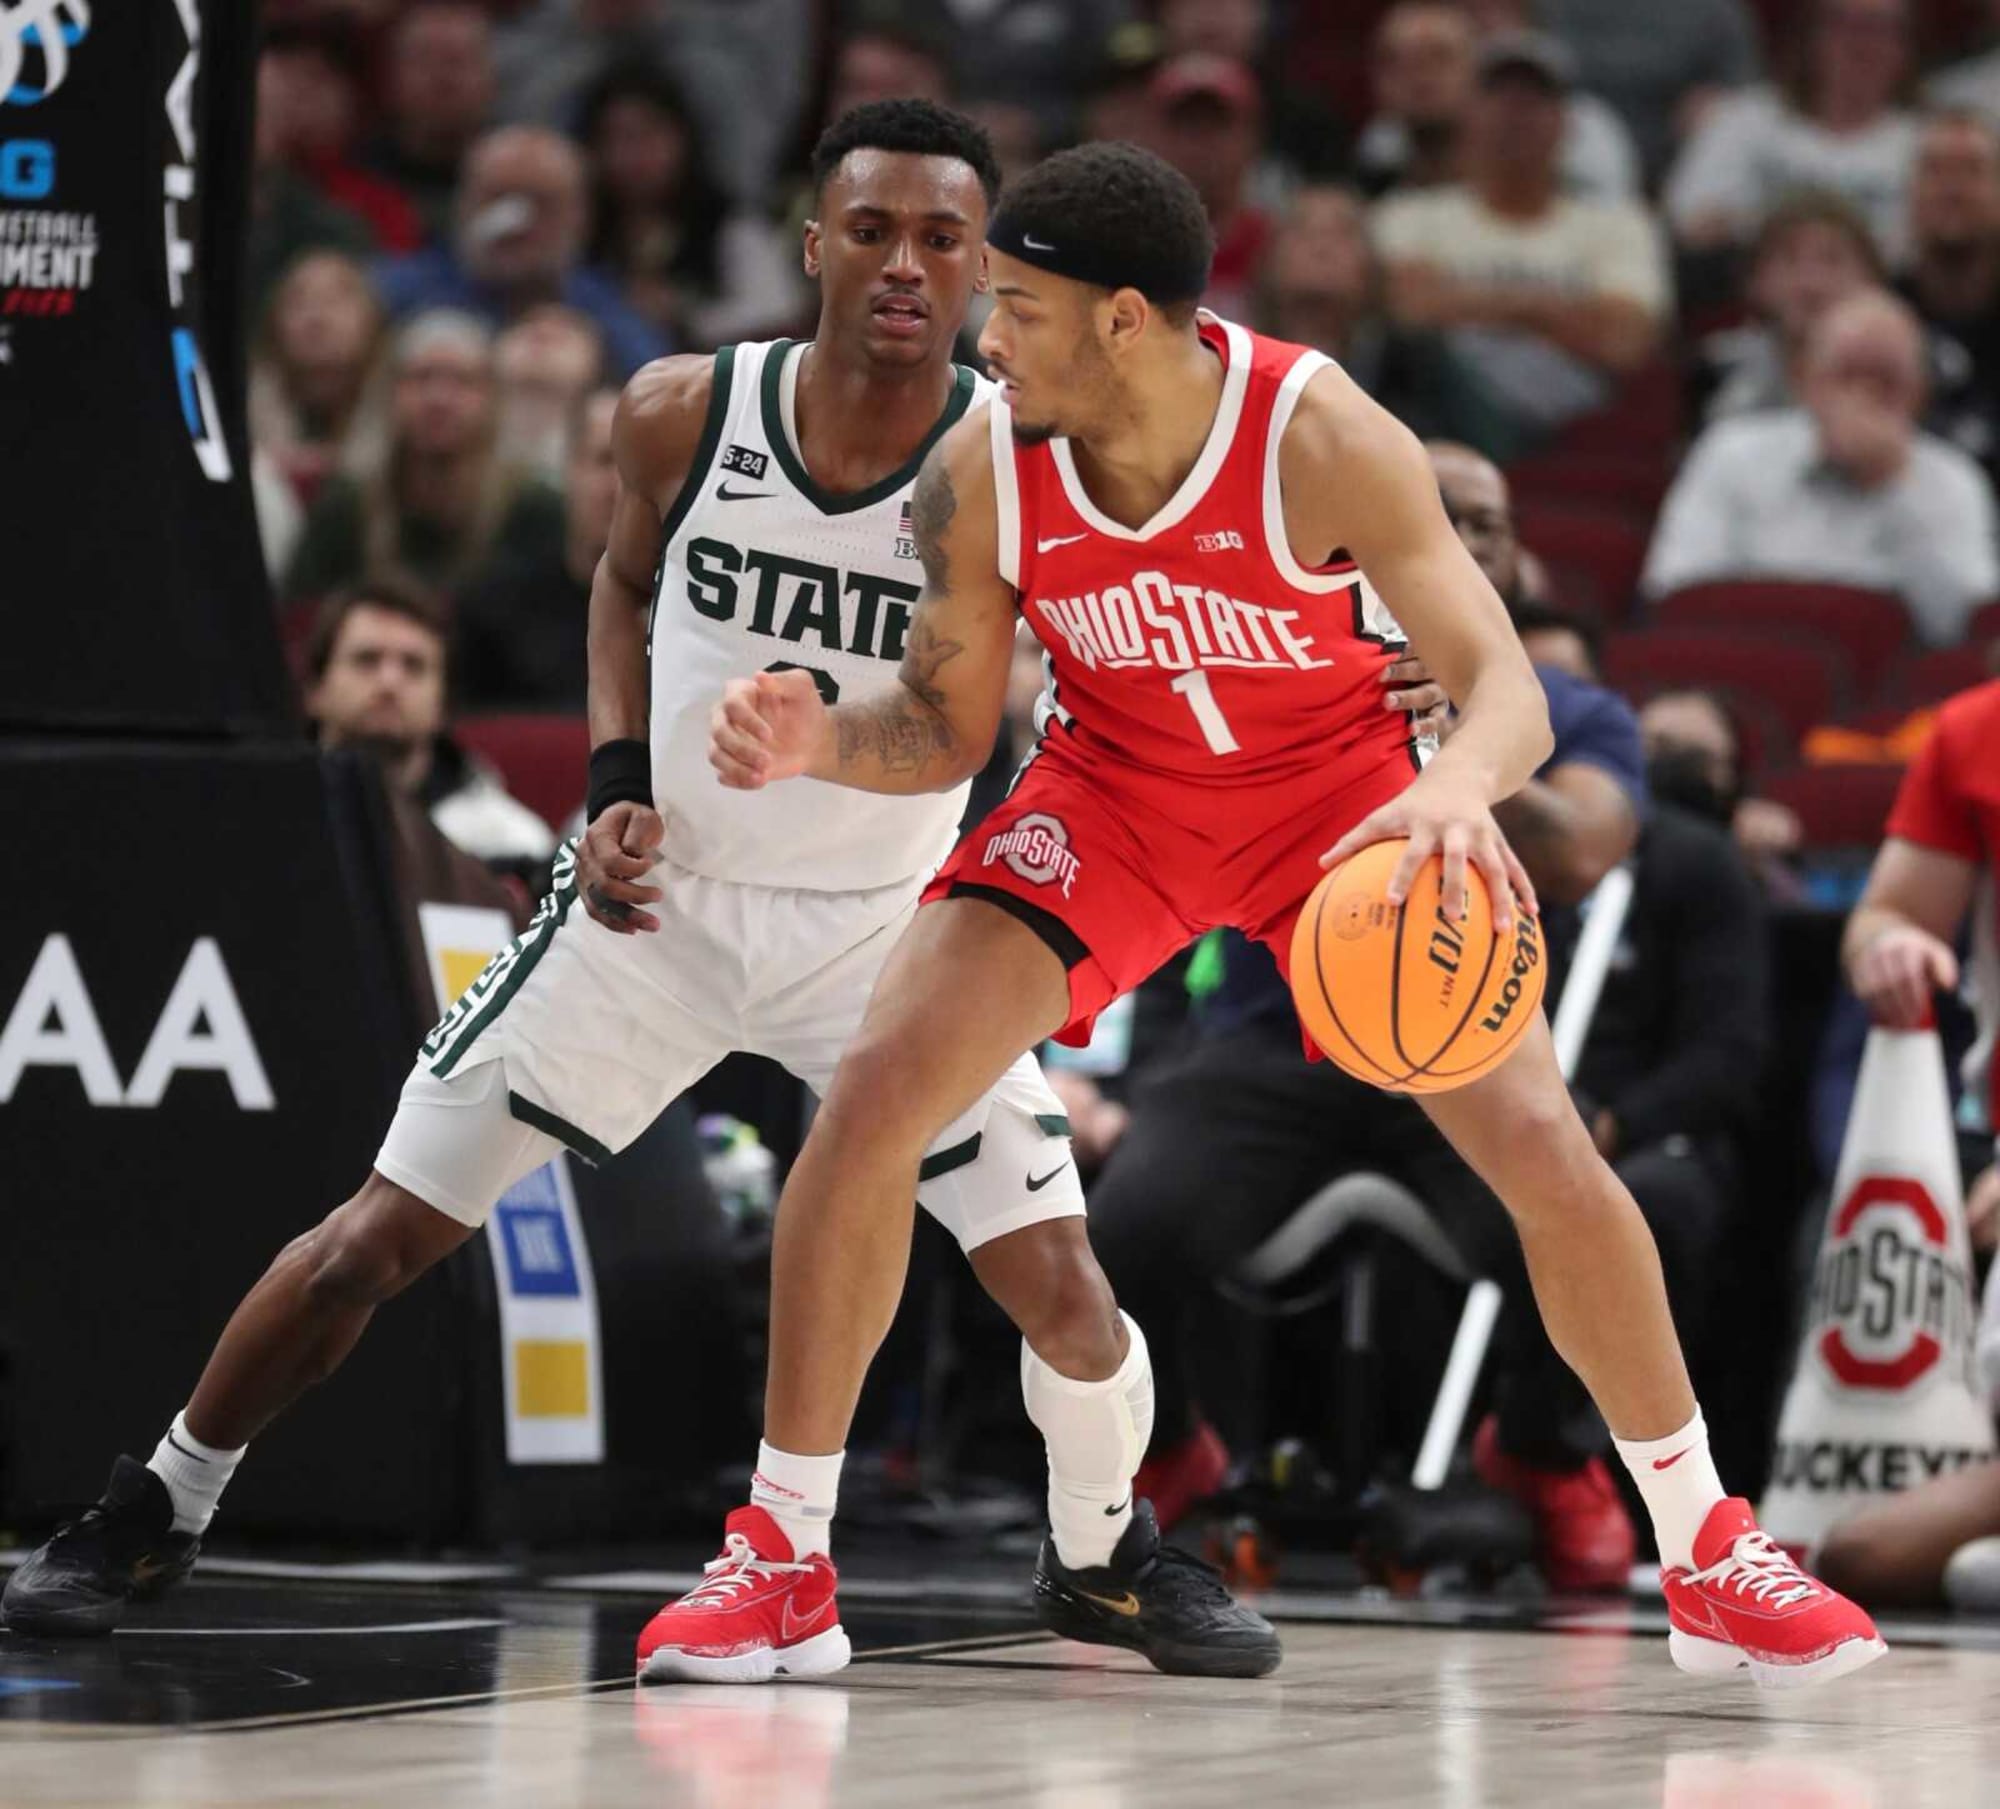 Ohio State Basketball Team’s Conference Schedule Announced by Big Ten